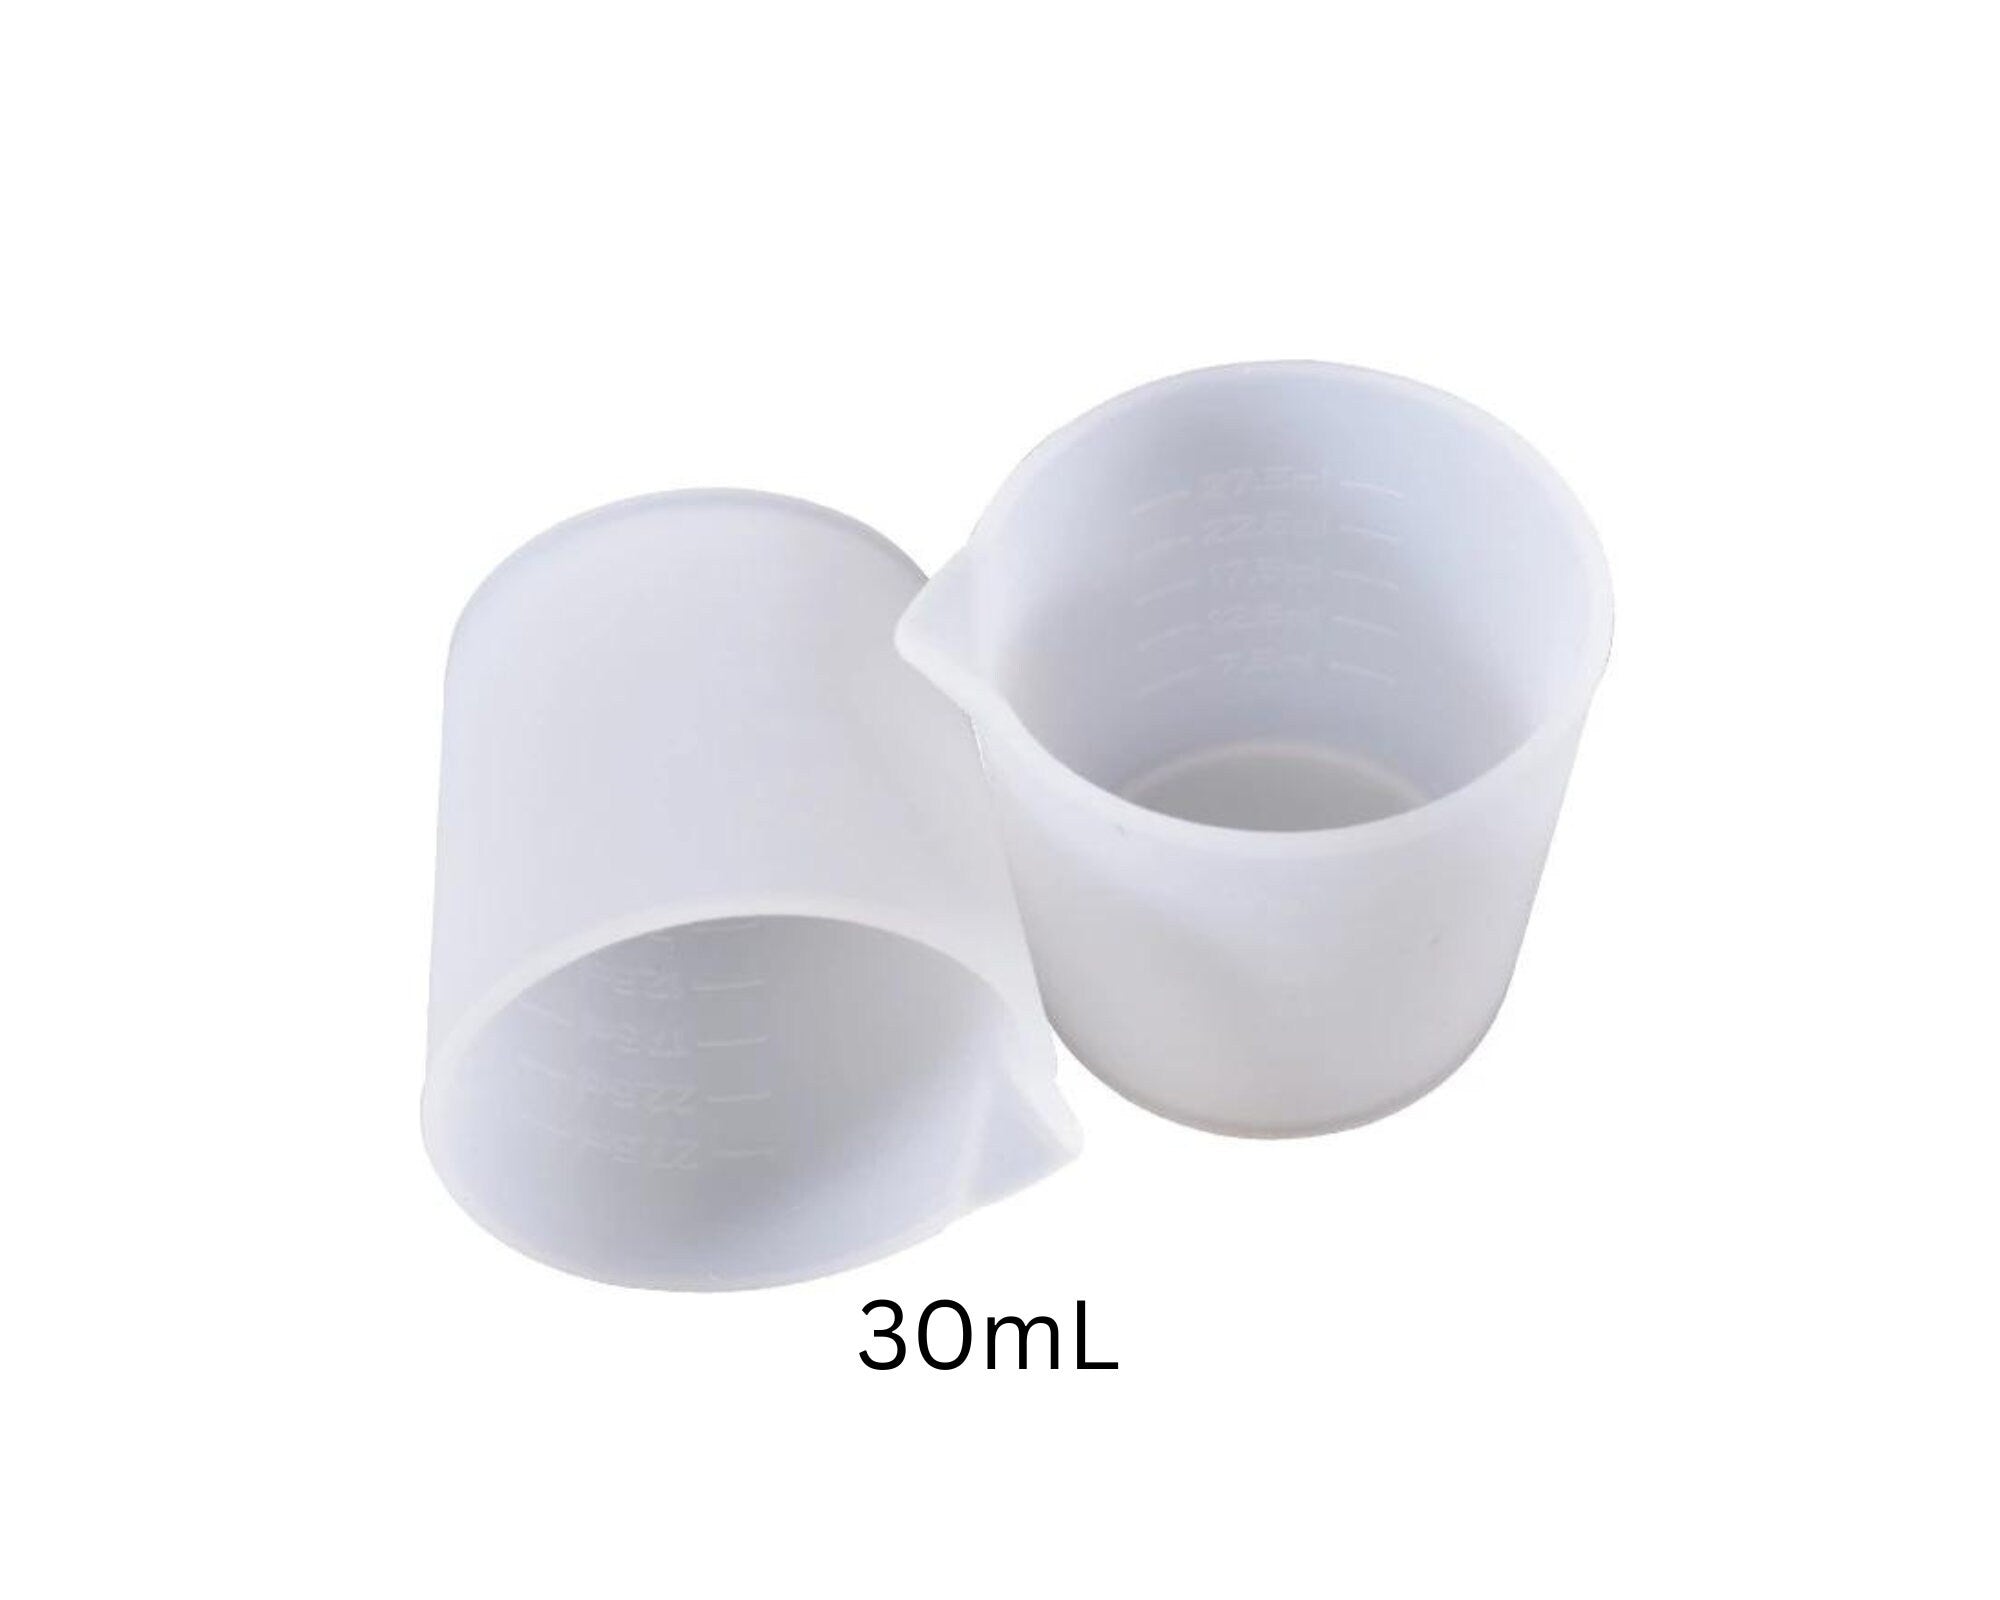 5pcs small silicone beaker, 30mL reusable silicone beaker, Epoxy Resin measuring cup, resin making supplies, DIY resin jewelry, resin tools